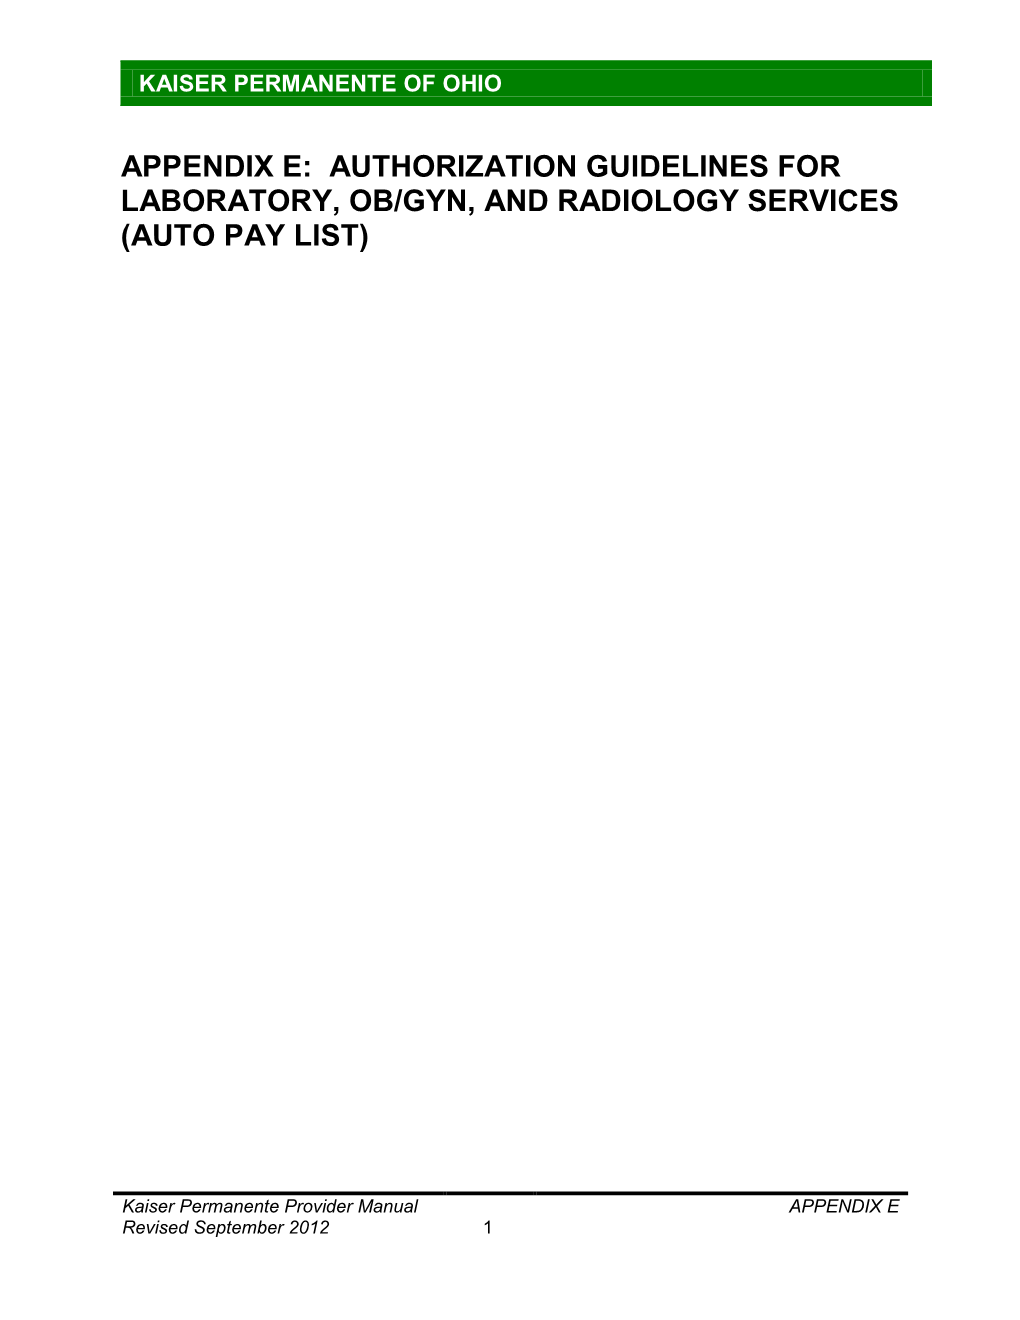 Appendix E: Authorization Guidelines for Laboratory, Ob/Gyn, and Radiology Services (Auto Pay List)